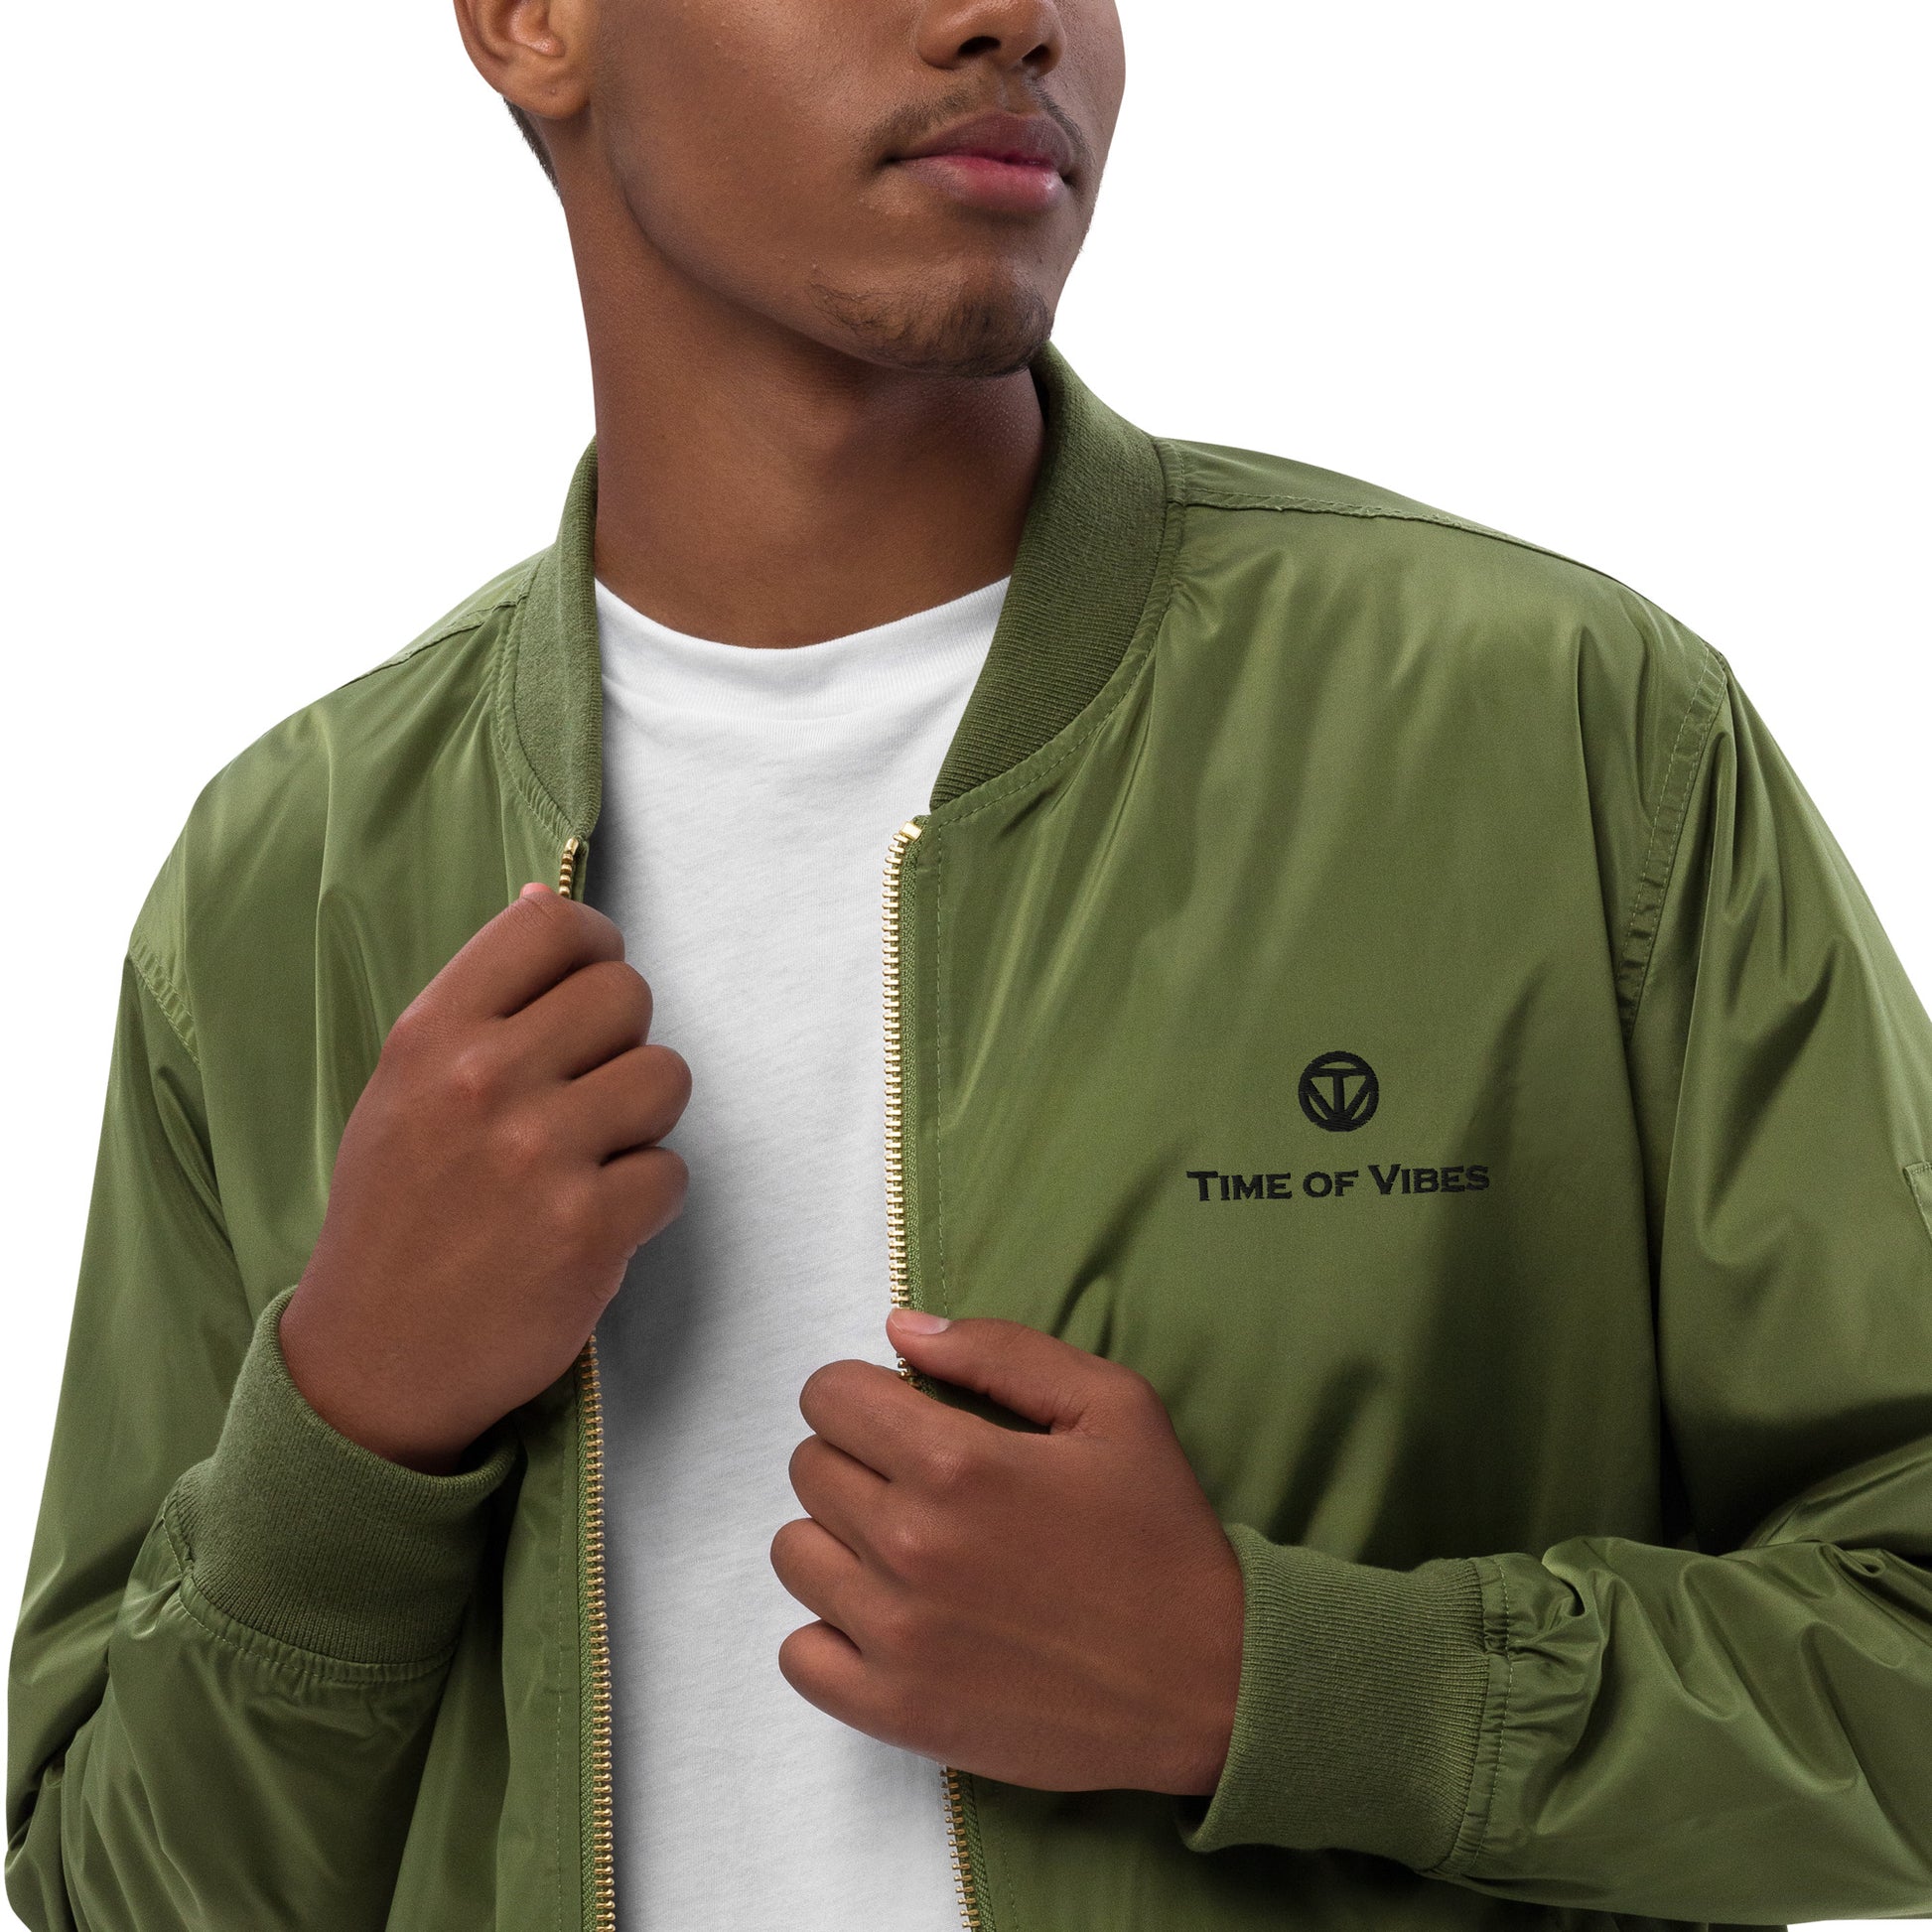 TIME OF VIBES - Premium recycled Blouson Jacket (Green) - €89.00